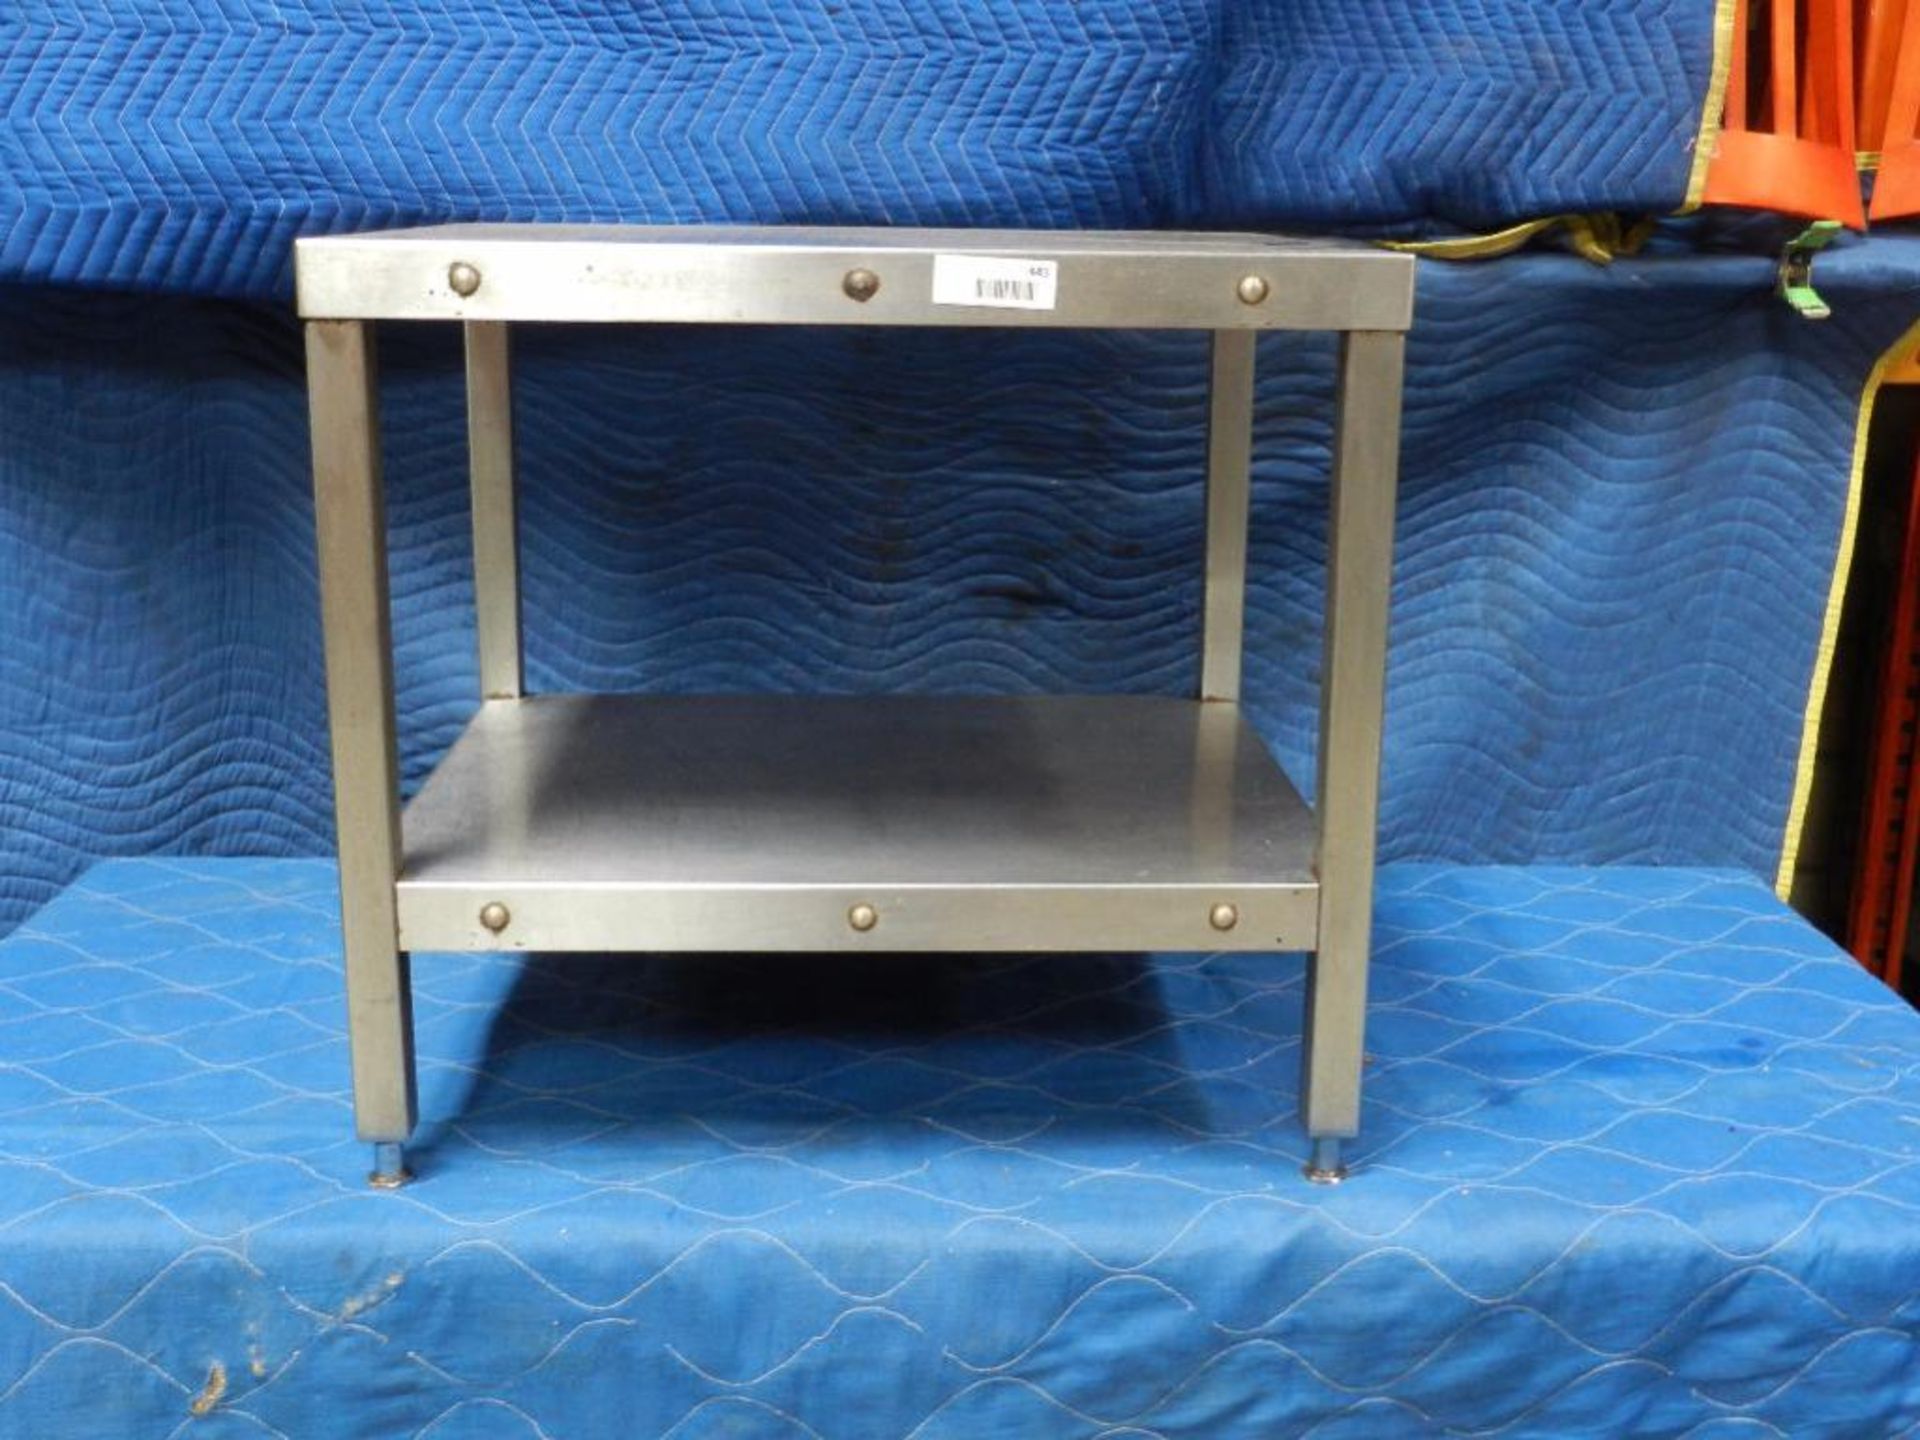 Stand Stainless Steel with bottom storage shelf. Equipment Stand Approx size (20 x 24 x 30in.)